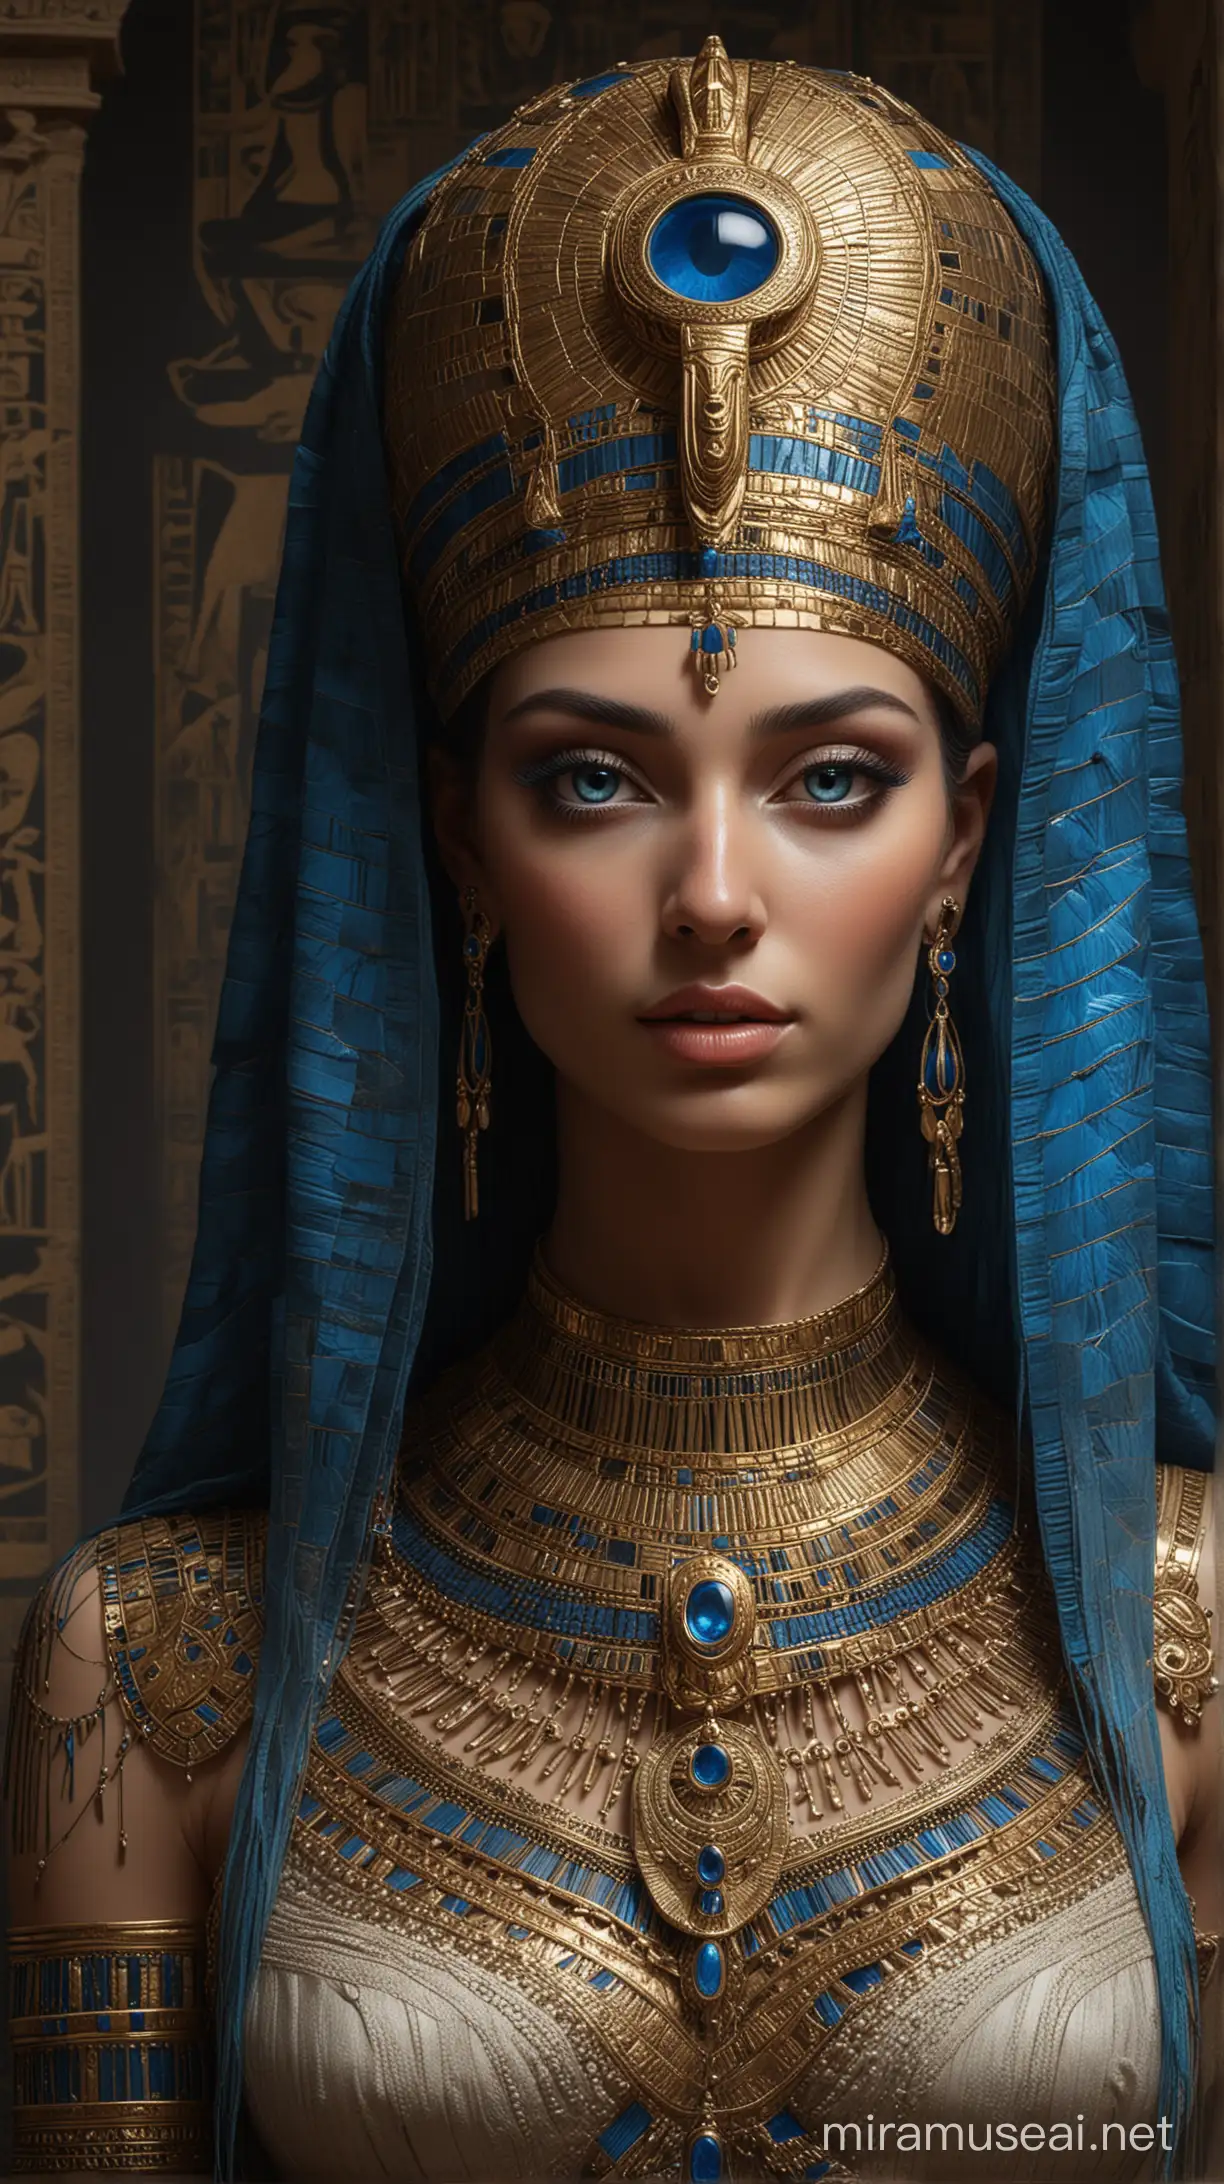 Imagine the naked Egyptian goddess Isis depicted in her natural form, adorned with captivating blue eyes that radiate lifelike intensity. Surrounding her is an aura filled with an enigmatic charm, drawing observers into the depths of her ancient mystique. Against a backdrop of deep and mysterious shades reminiscent of Egypt's hidden lore, Isis stands poised and powerful. Her intricately detailed robes exude a sense of dark sophistication, while ornate ornaments adorning her hair evoke a haunting beauty. The interplay of light and shadow casts a dramatic contrast, elevating her divine presence with an aura of solemnity and reverence.